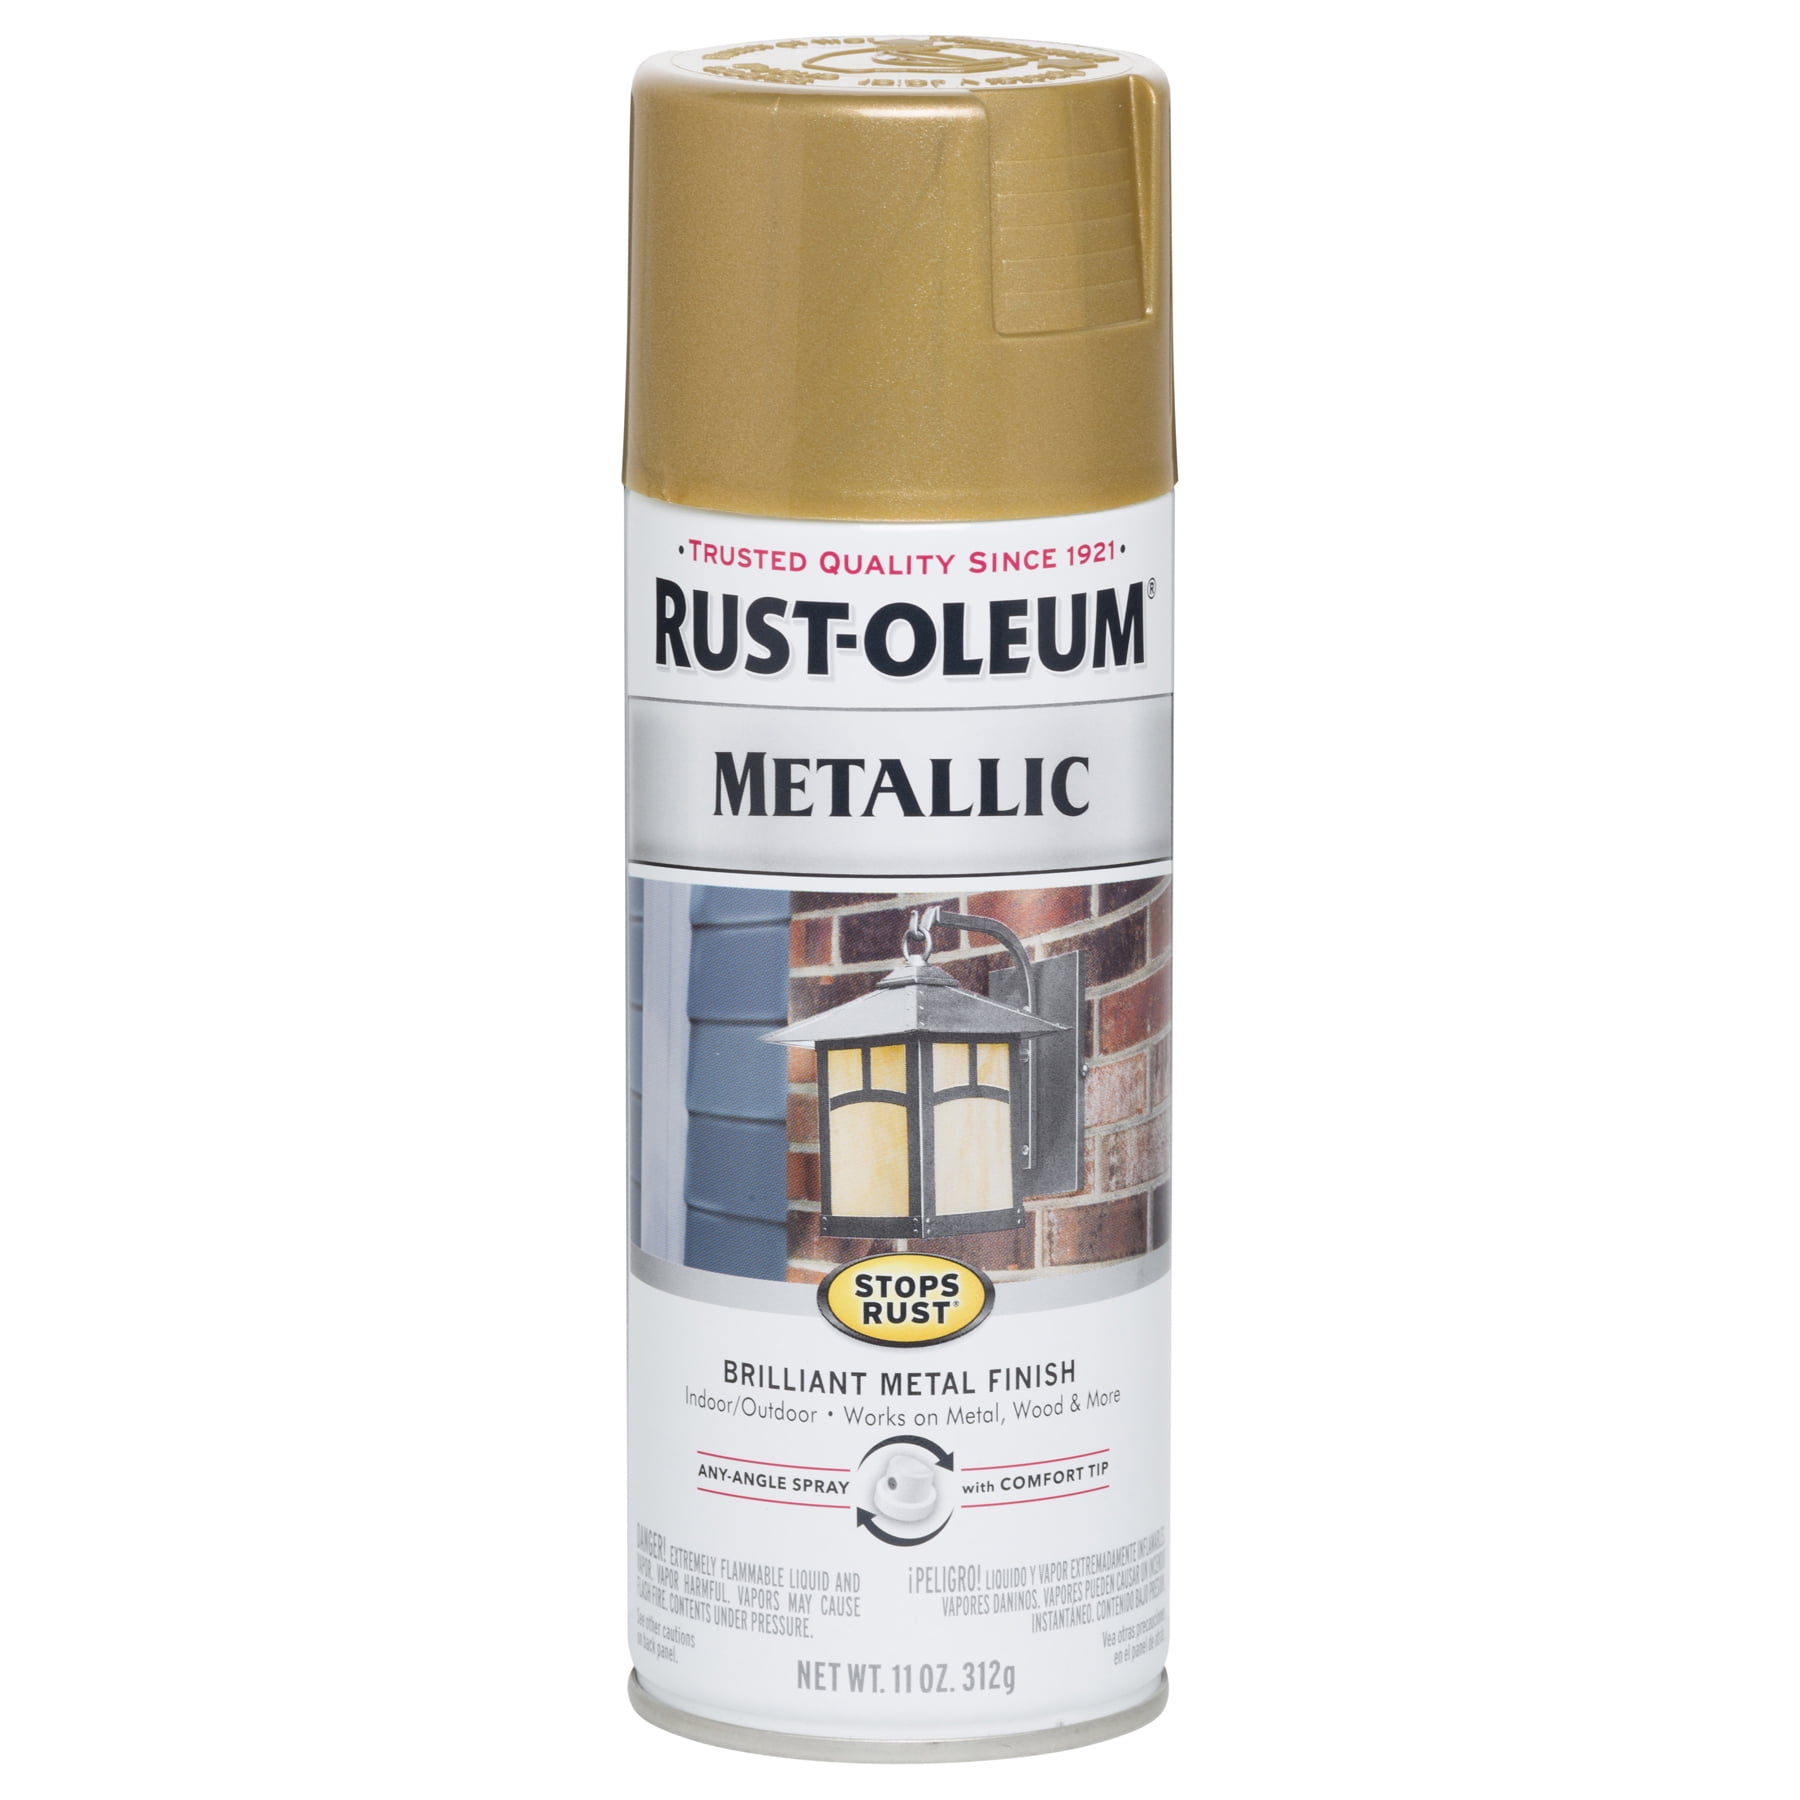 Rust-Oleum 1910830-2PK Specialty Metallic Spray Paint, 11 Ounce (Pack of  2), Gold, 2 Piece